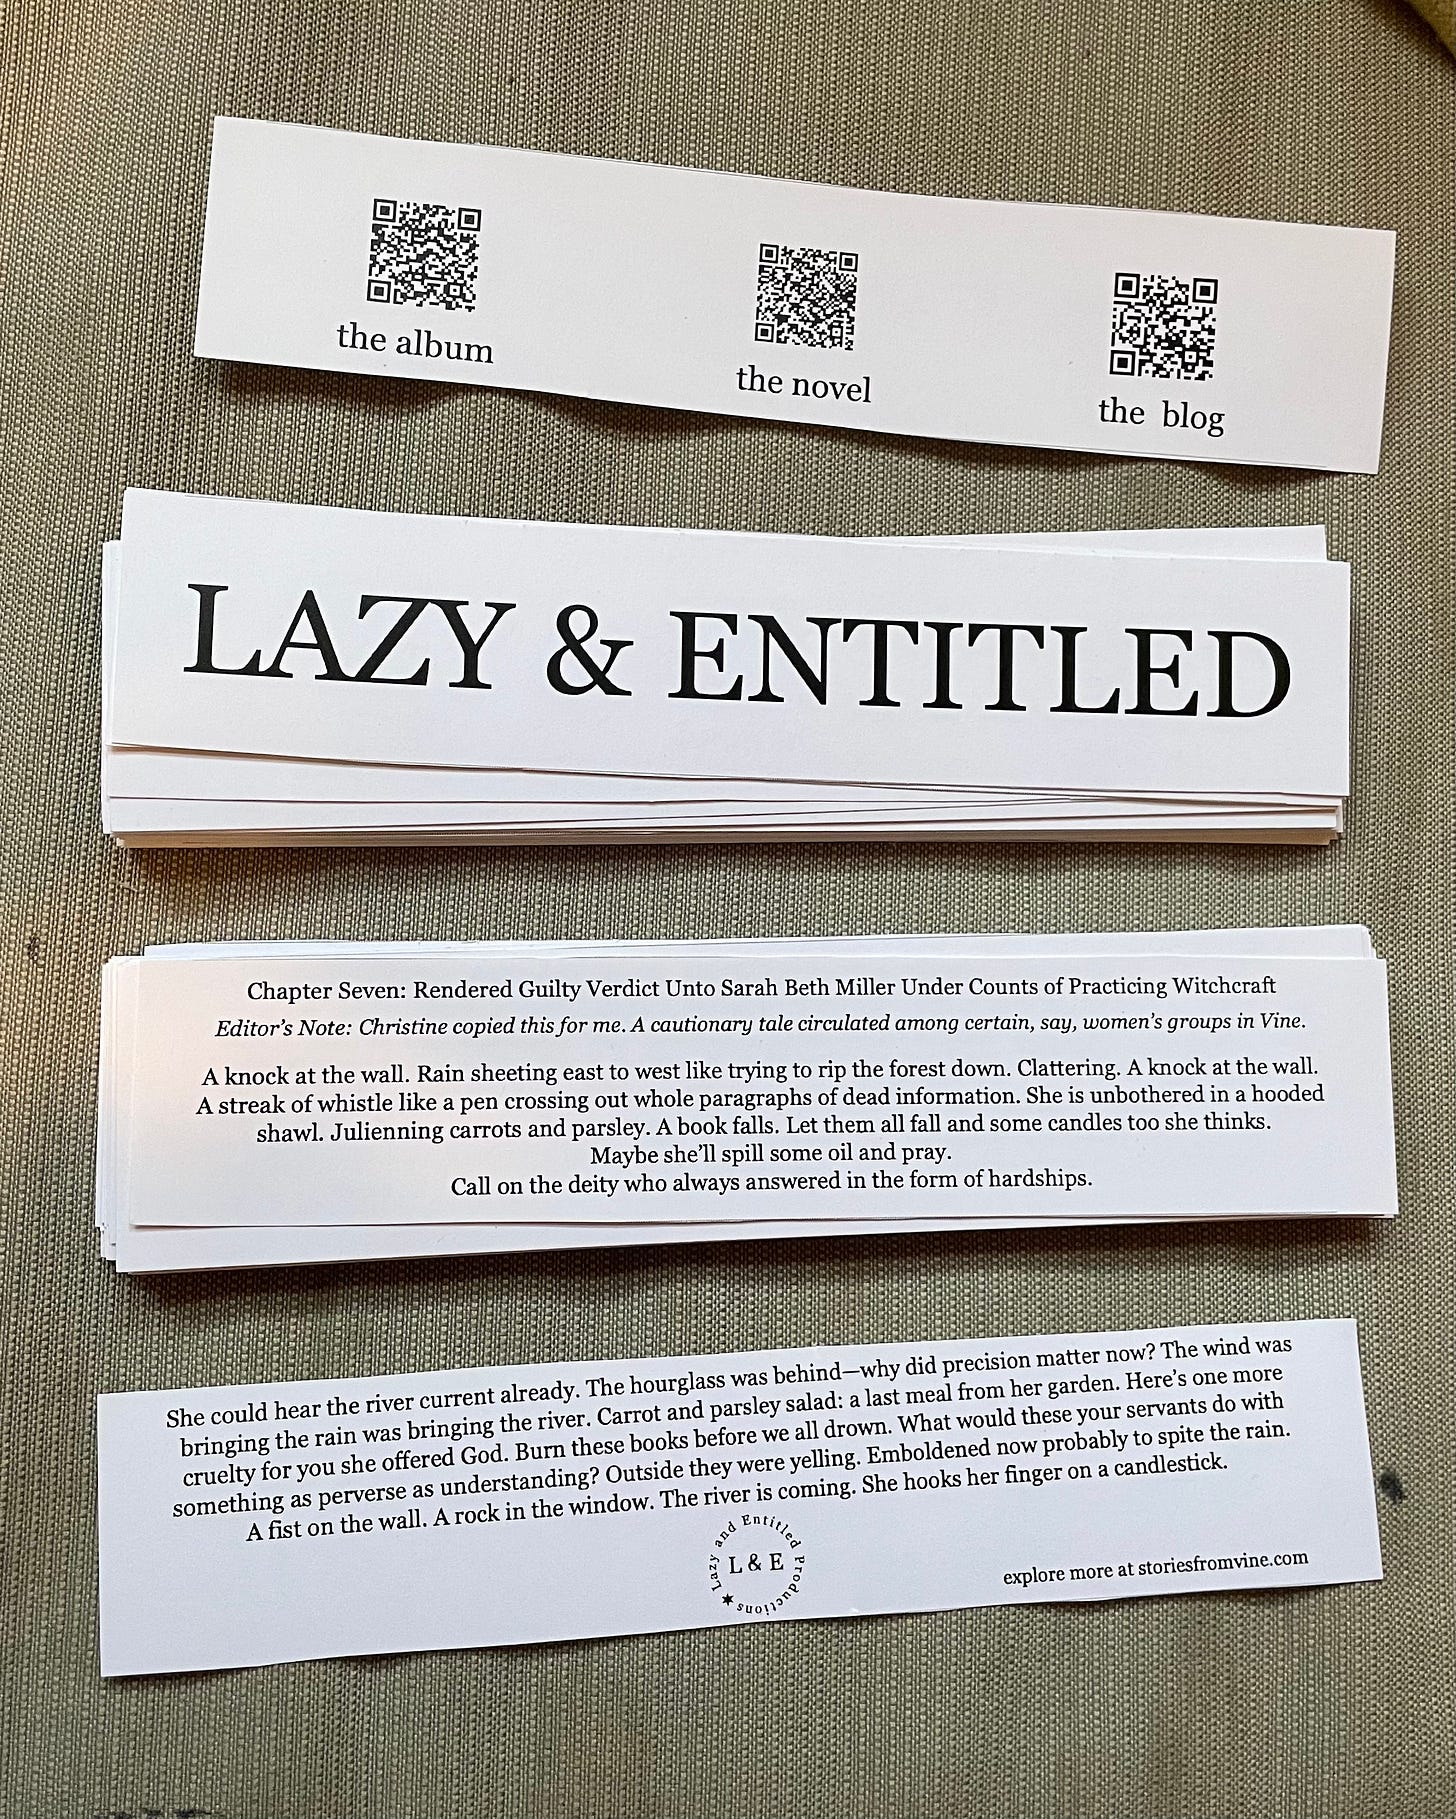 two bookmarks: one that reads 'LAZY & ENTITLED' on the front with QR codes for our album, novel, and blog on the back; one bookmark that has the full text of Chapter Seven from Vine on the front and back